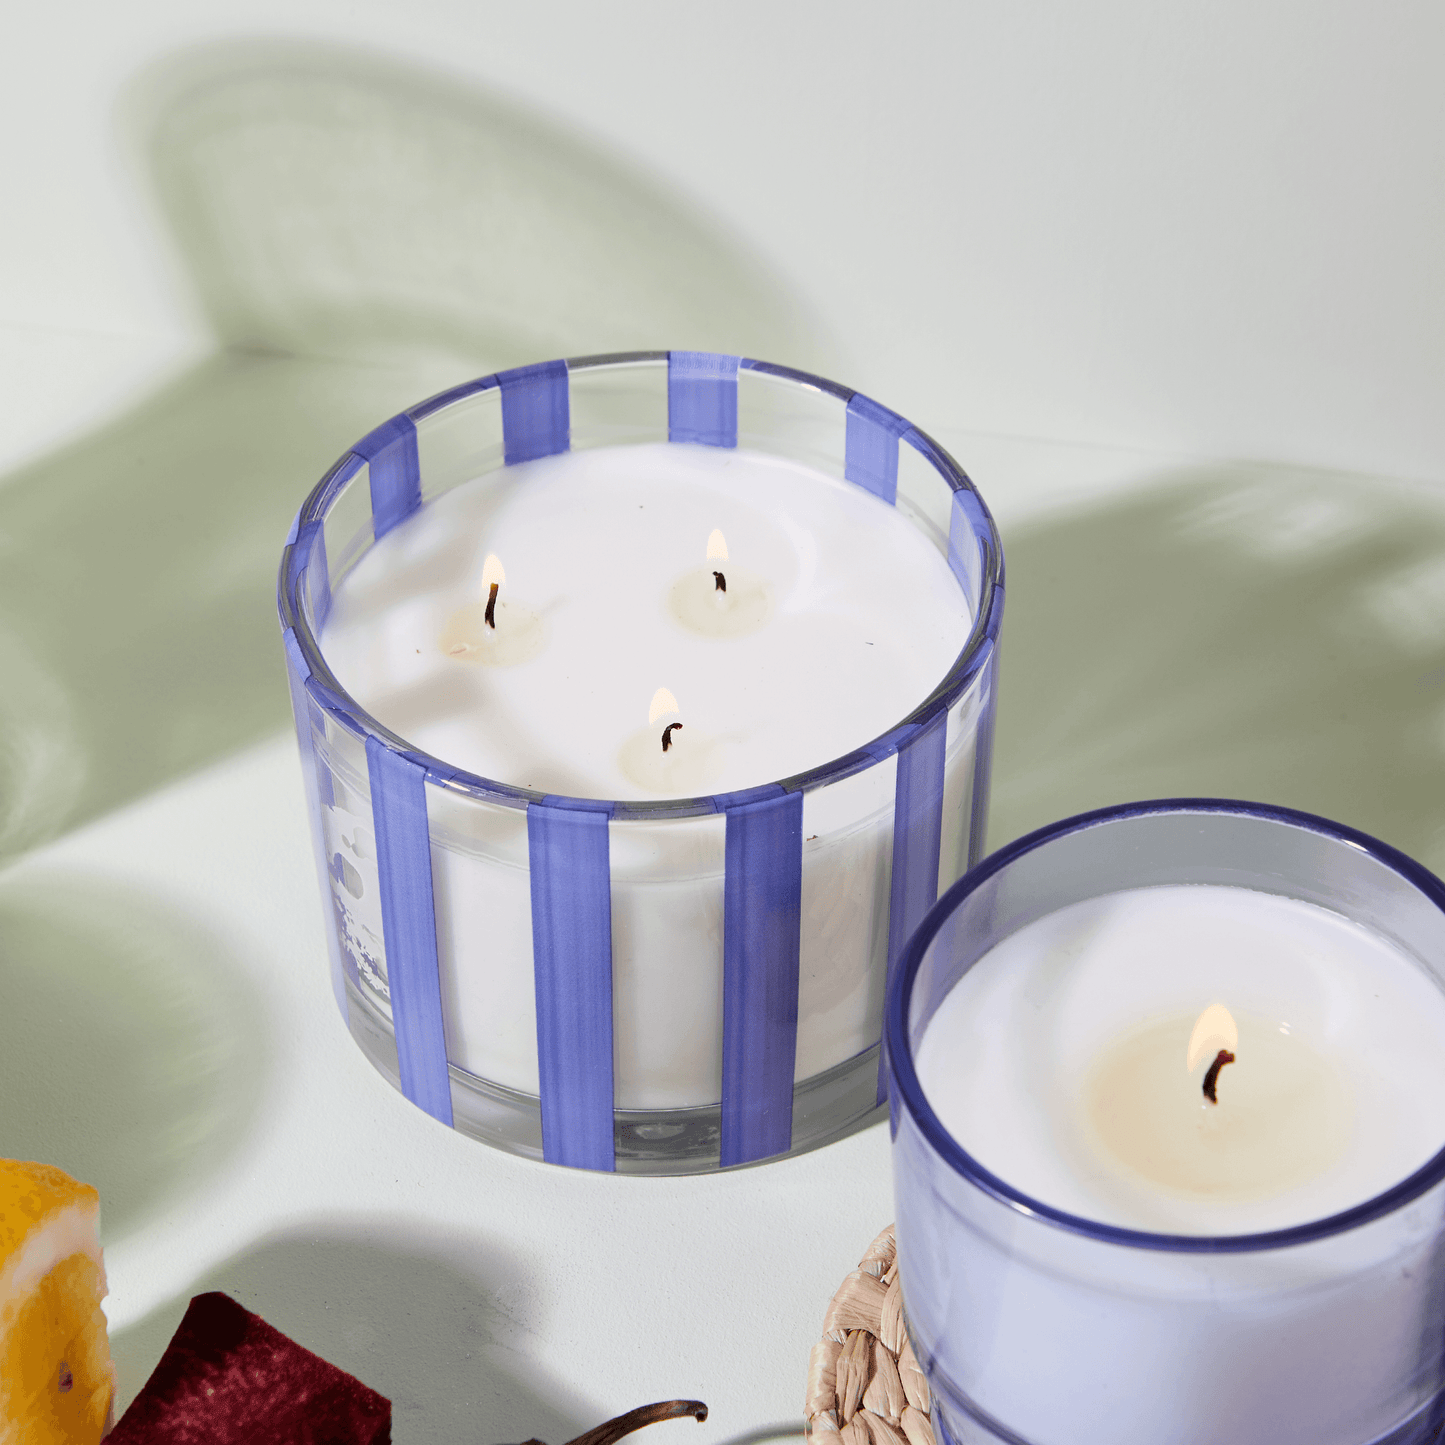 Blue/purple Al Fresco candle pictured lit next to a smaller candle of the same color but solidly colored.